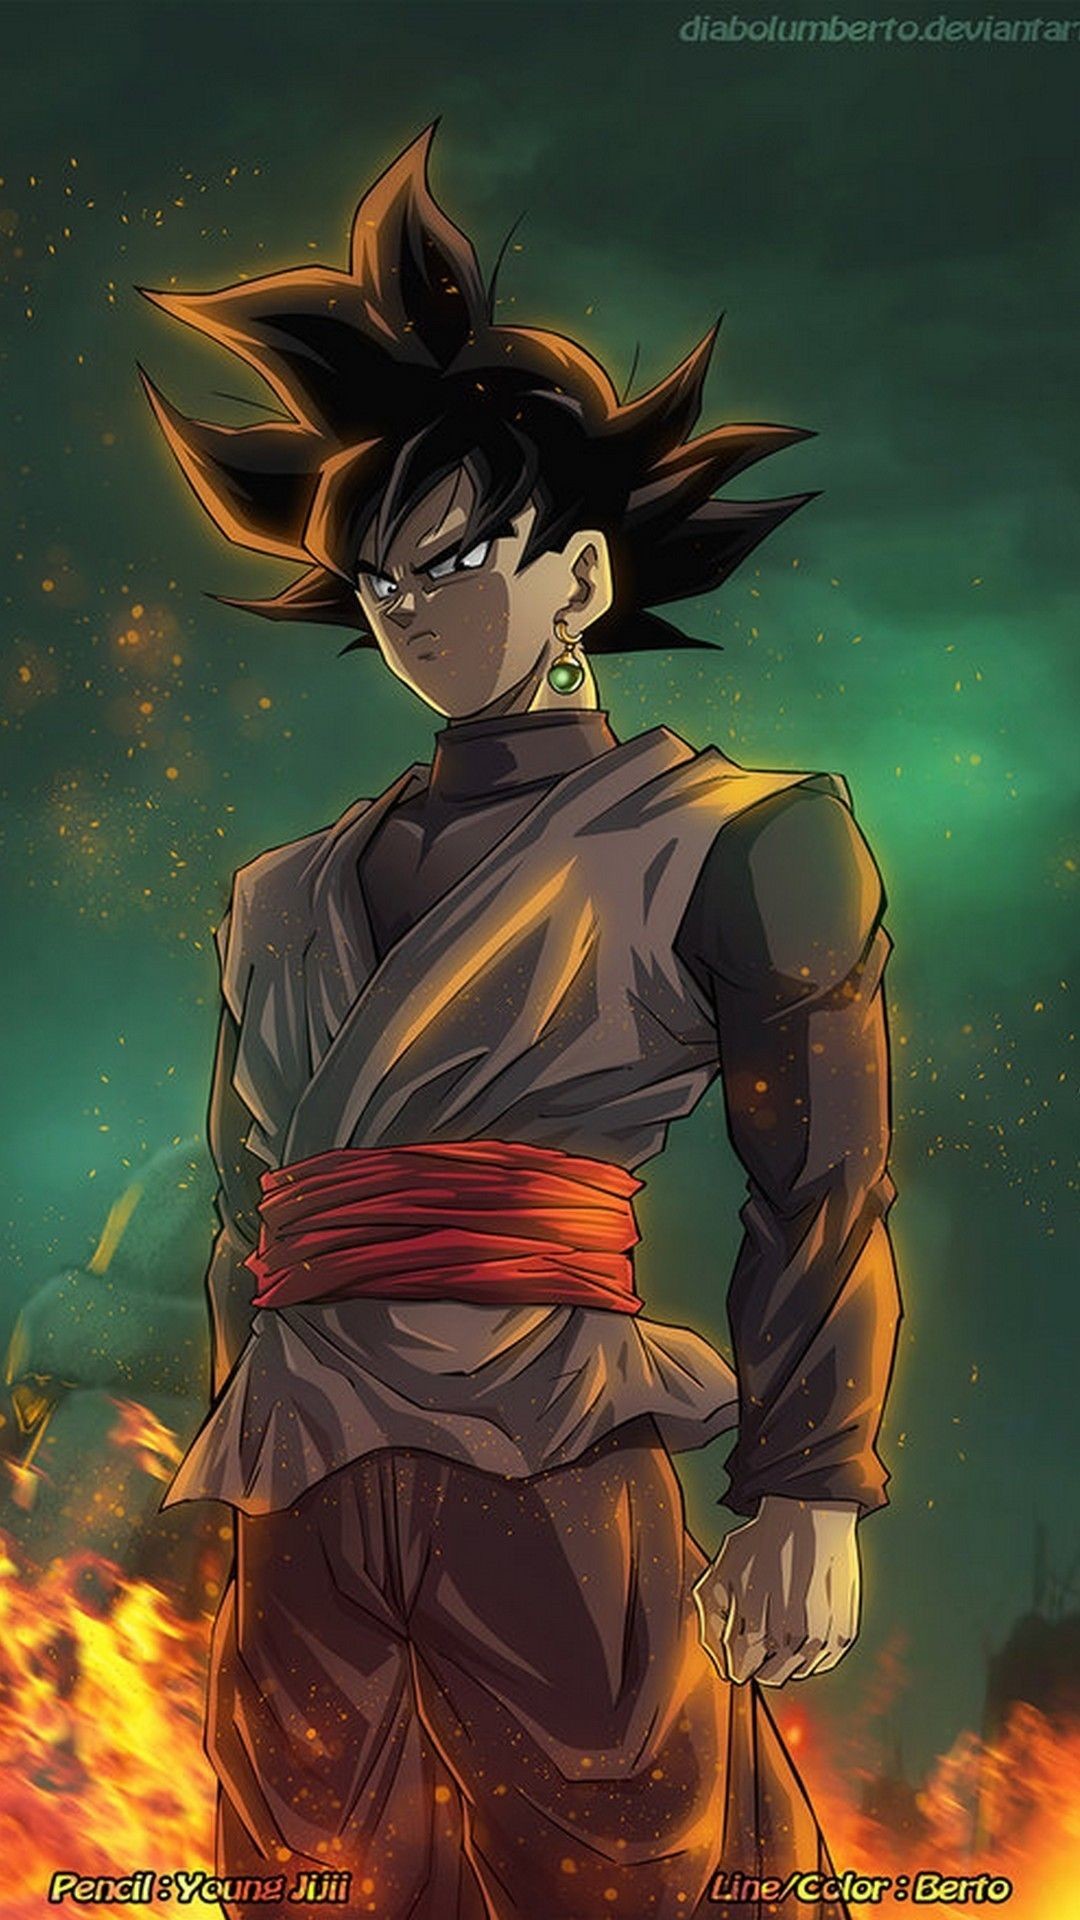 1080x1920 Wallpaper Android Black Goku - Best Android Wallpapers